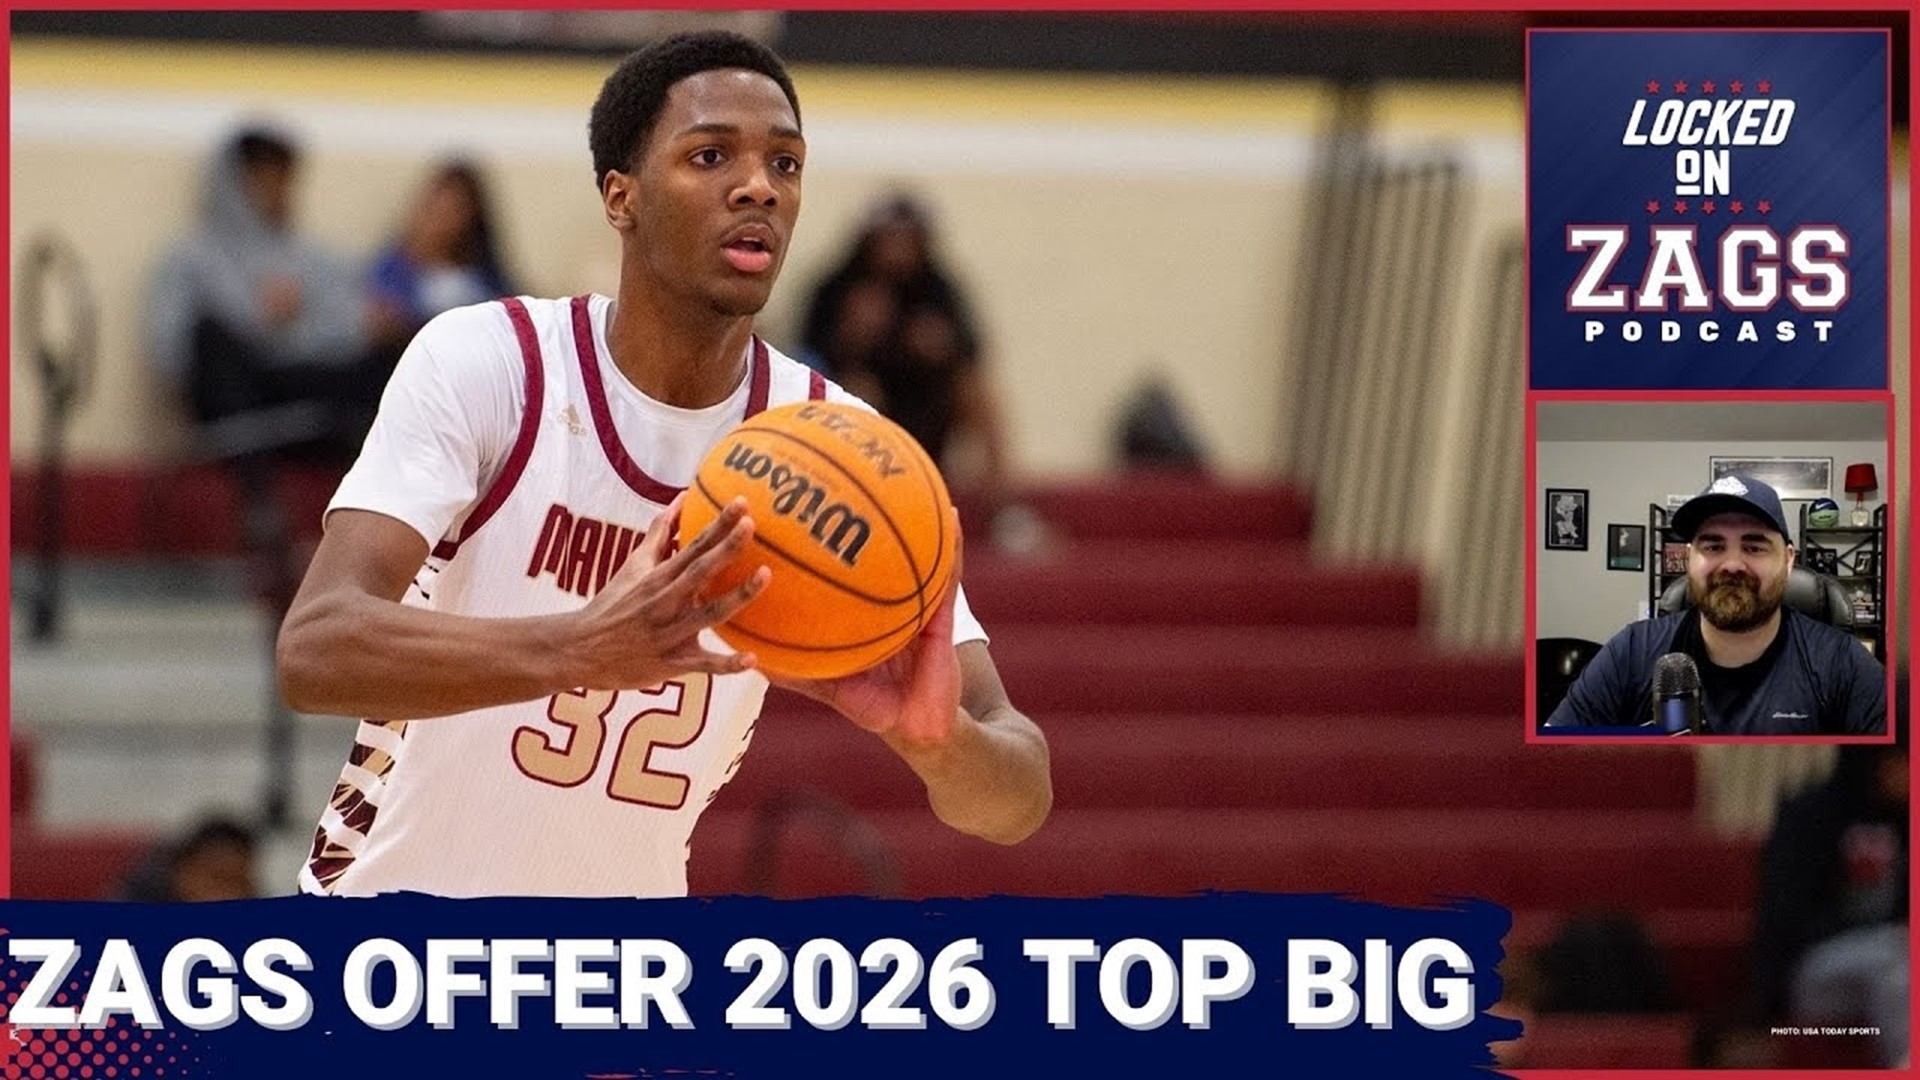 Mark Few and the Gonzaga Bulldogs made an offer to 2026 center Sam Funches, the top ranked big man in his class and a top 10 prospect overall according to 247Sports.